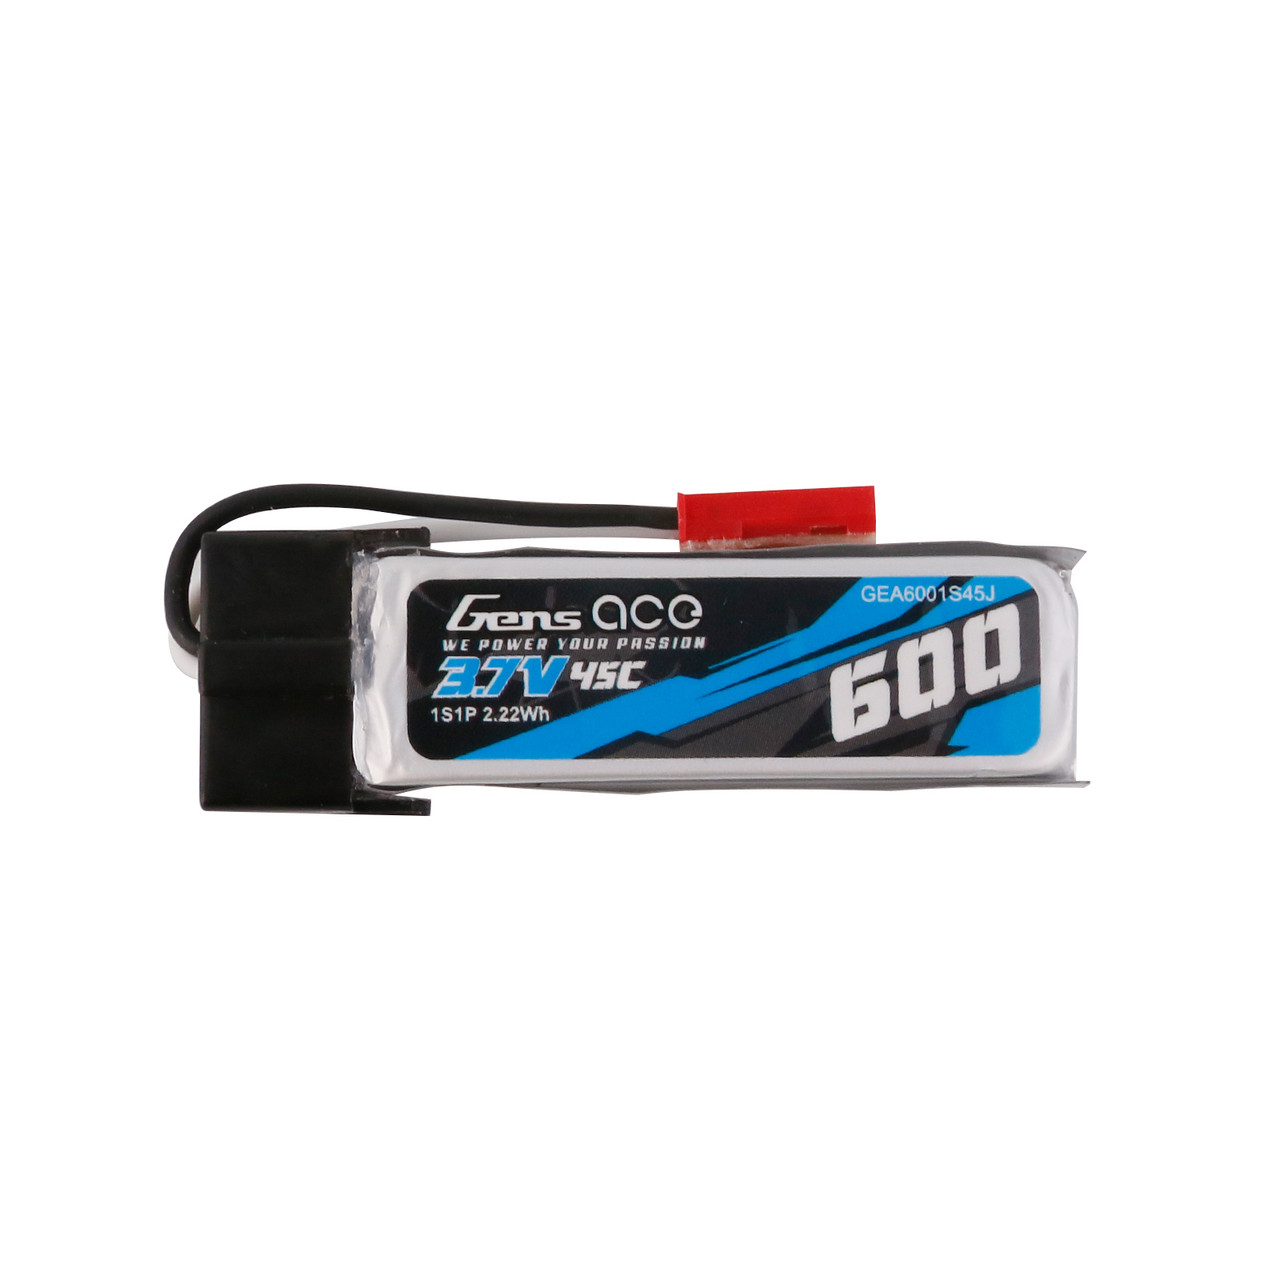 Gens ace 600mAh 3.7V 45C 1S1P Lipo Battery Pack with JST-SYP Plug